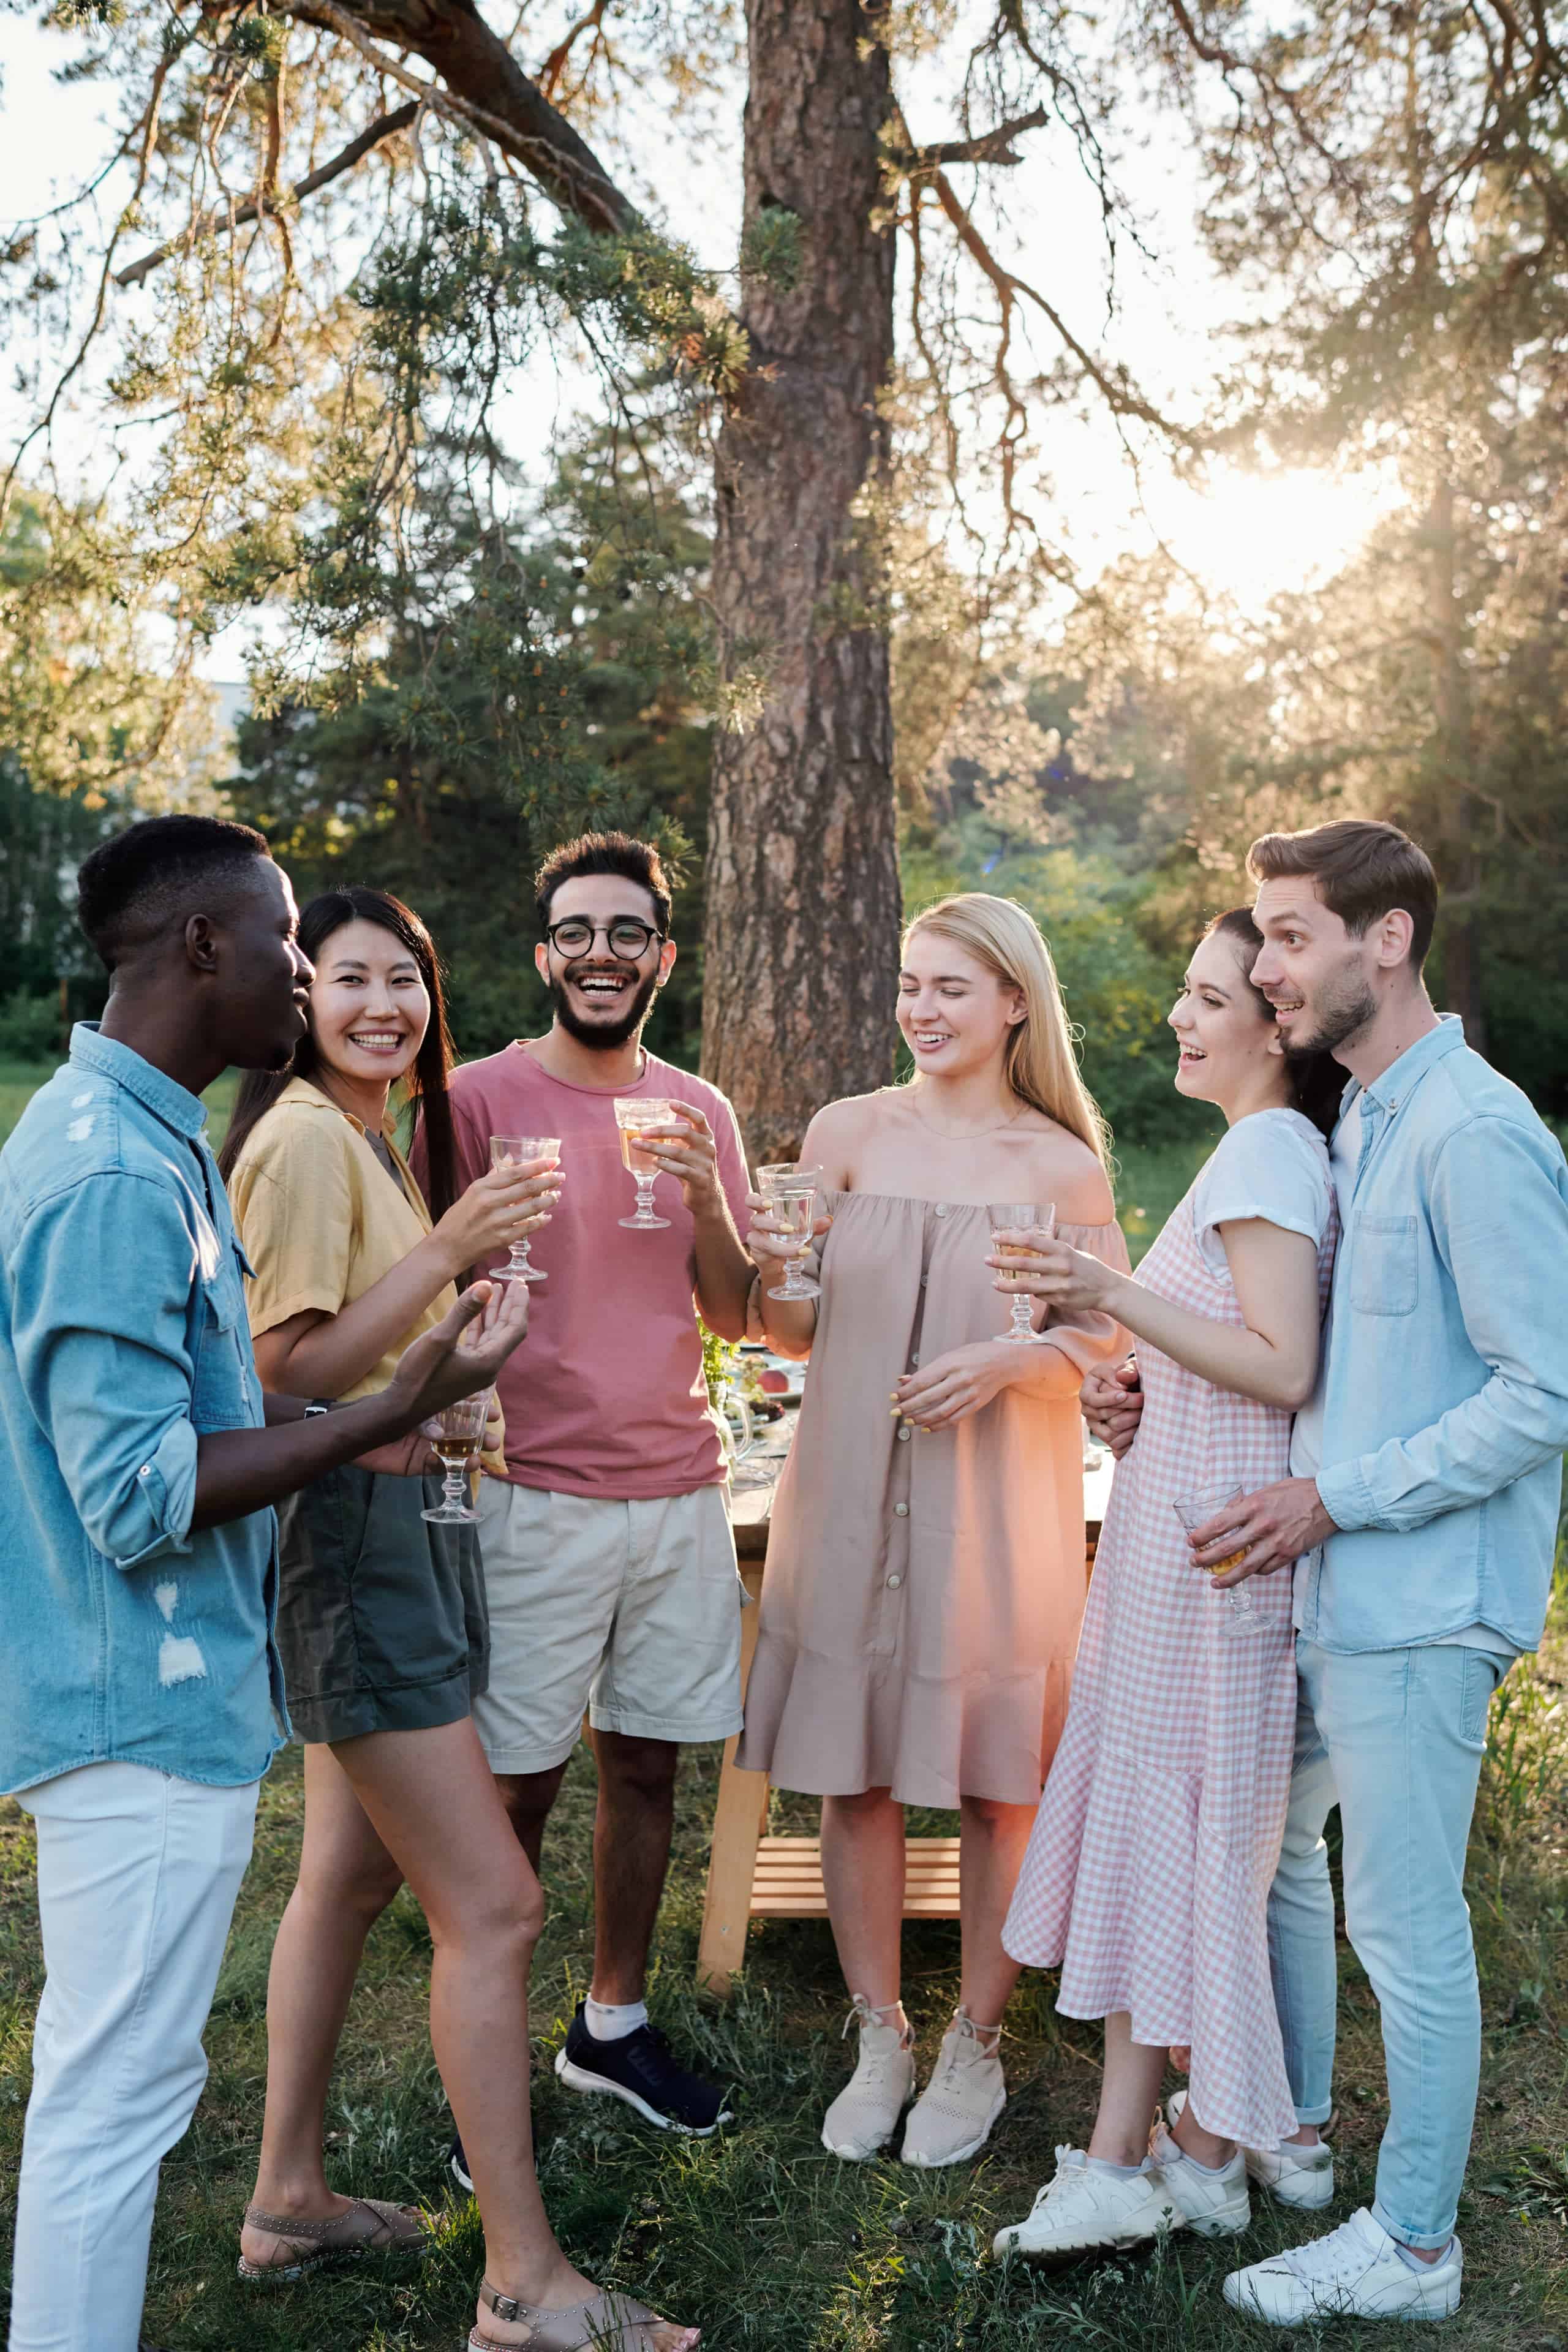 young-cheerful-men-and-women-of-various-ethnicities-cheering-up-with-drinks